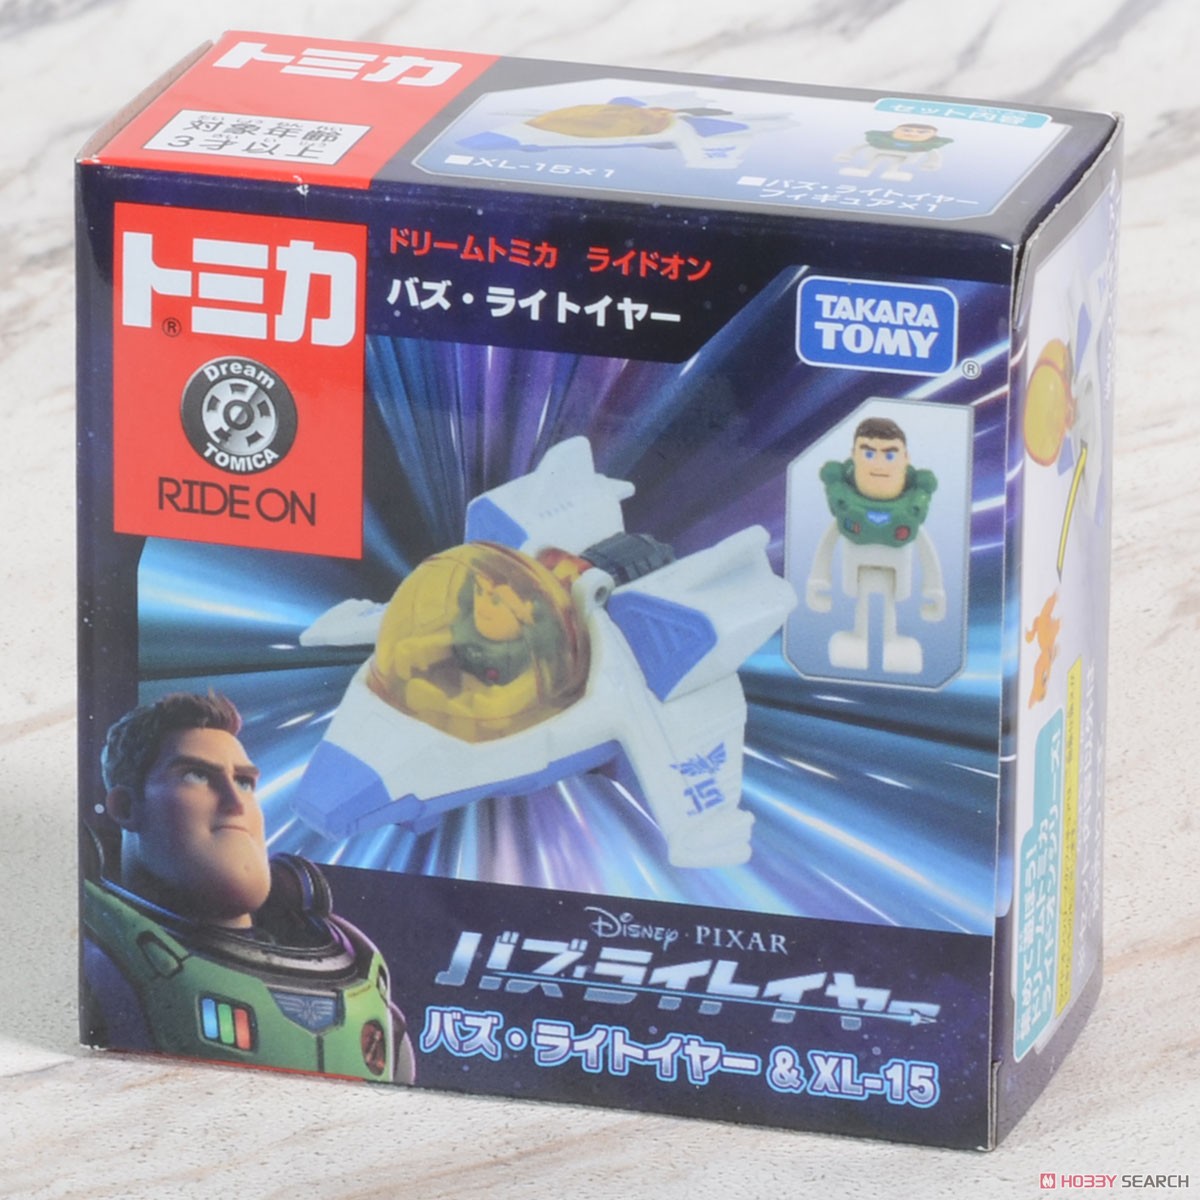 Dream Tomica Ride on Buzz Lightyear Buzz Lightyear & XL-15 (Tomica) Package1